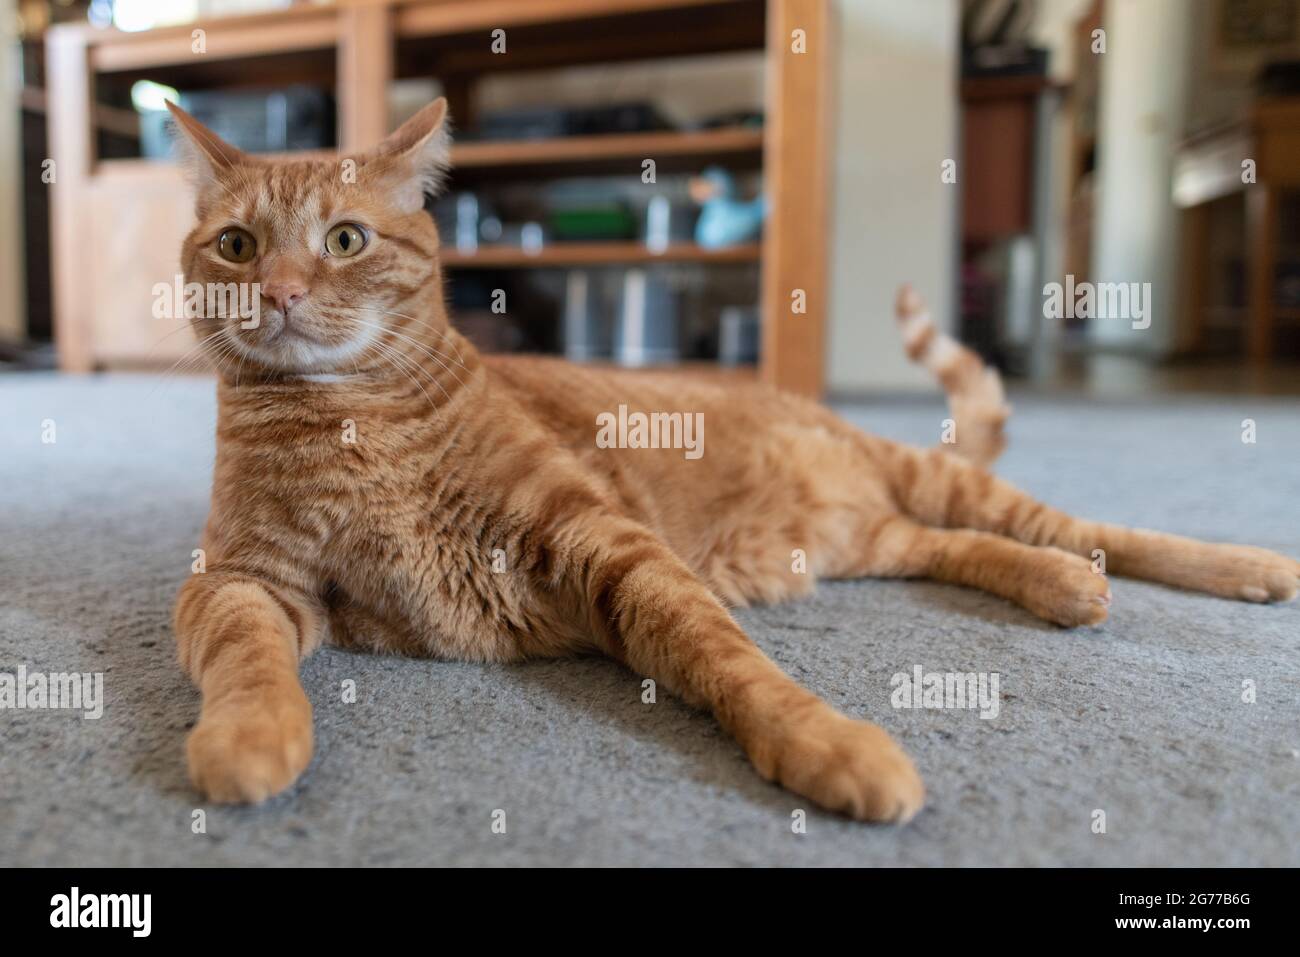 Orange stripped Tabby cat resting at home on carpet with furry paws stretched out in front of his body. Stock Photo